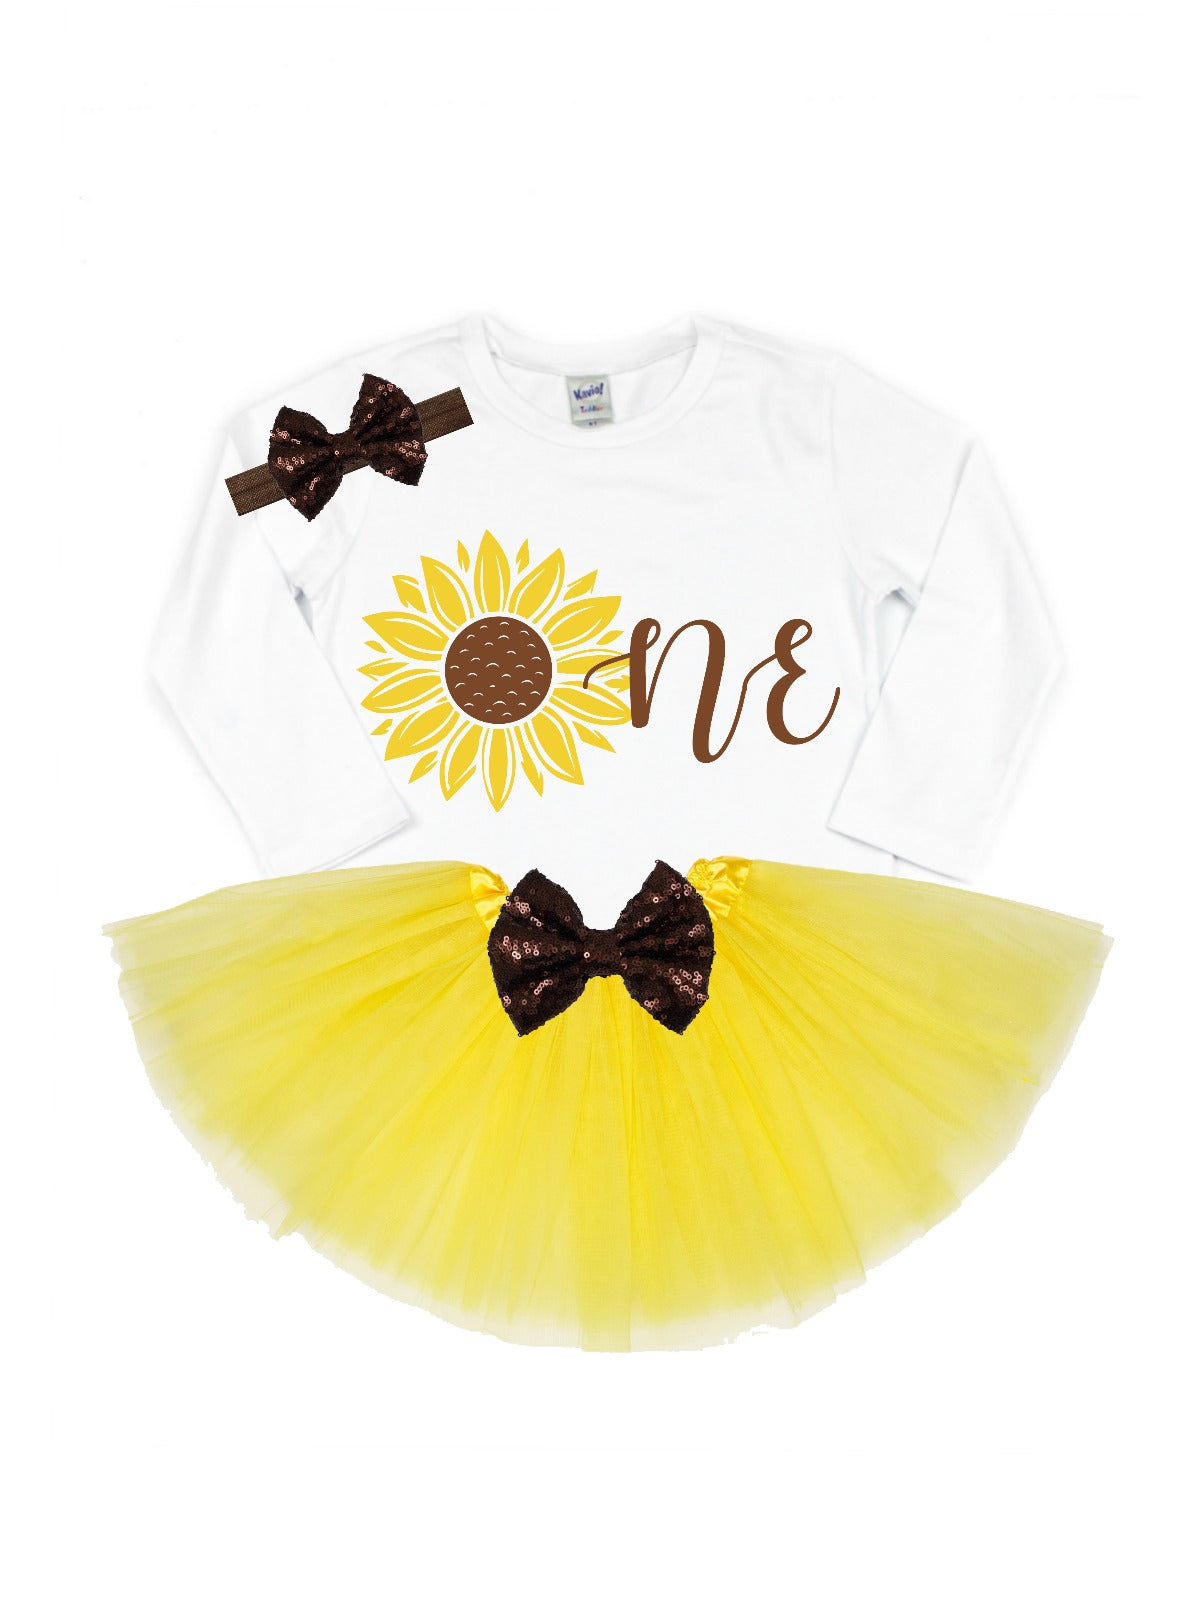 Sunflower One Tutu Birthday Outfit